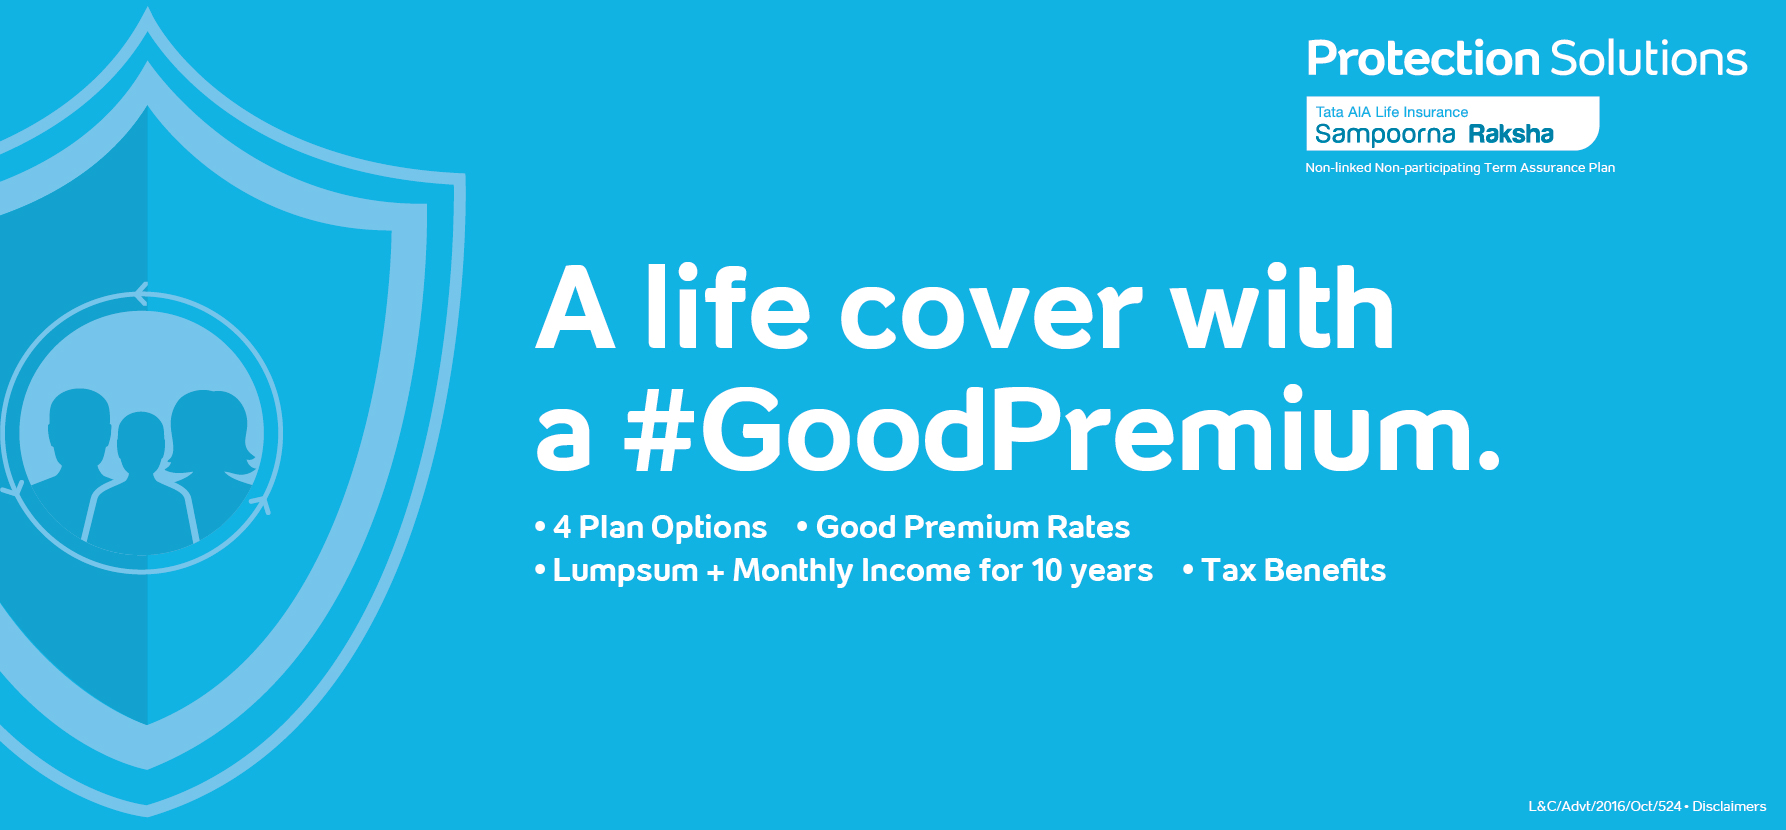 A life cover with a #GoodPremium.